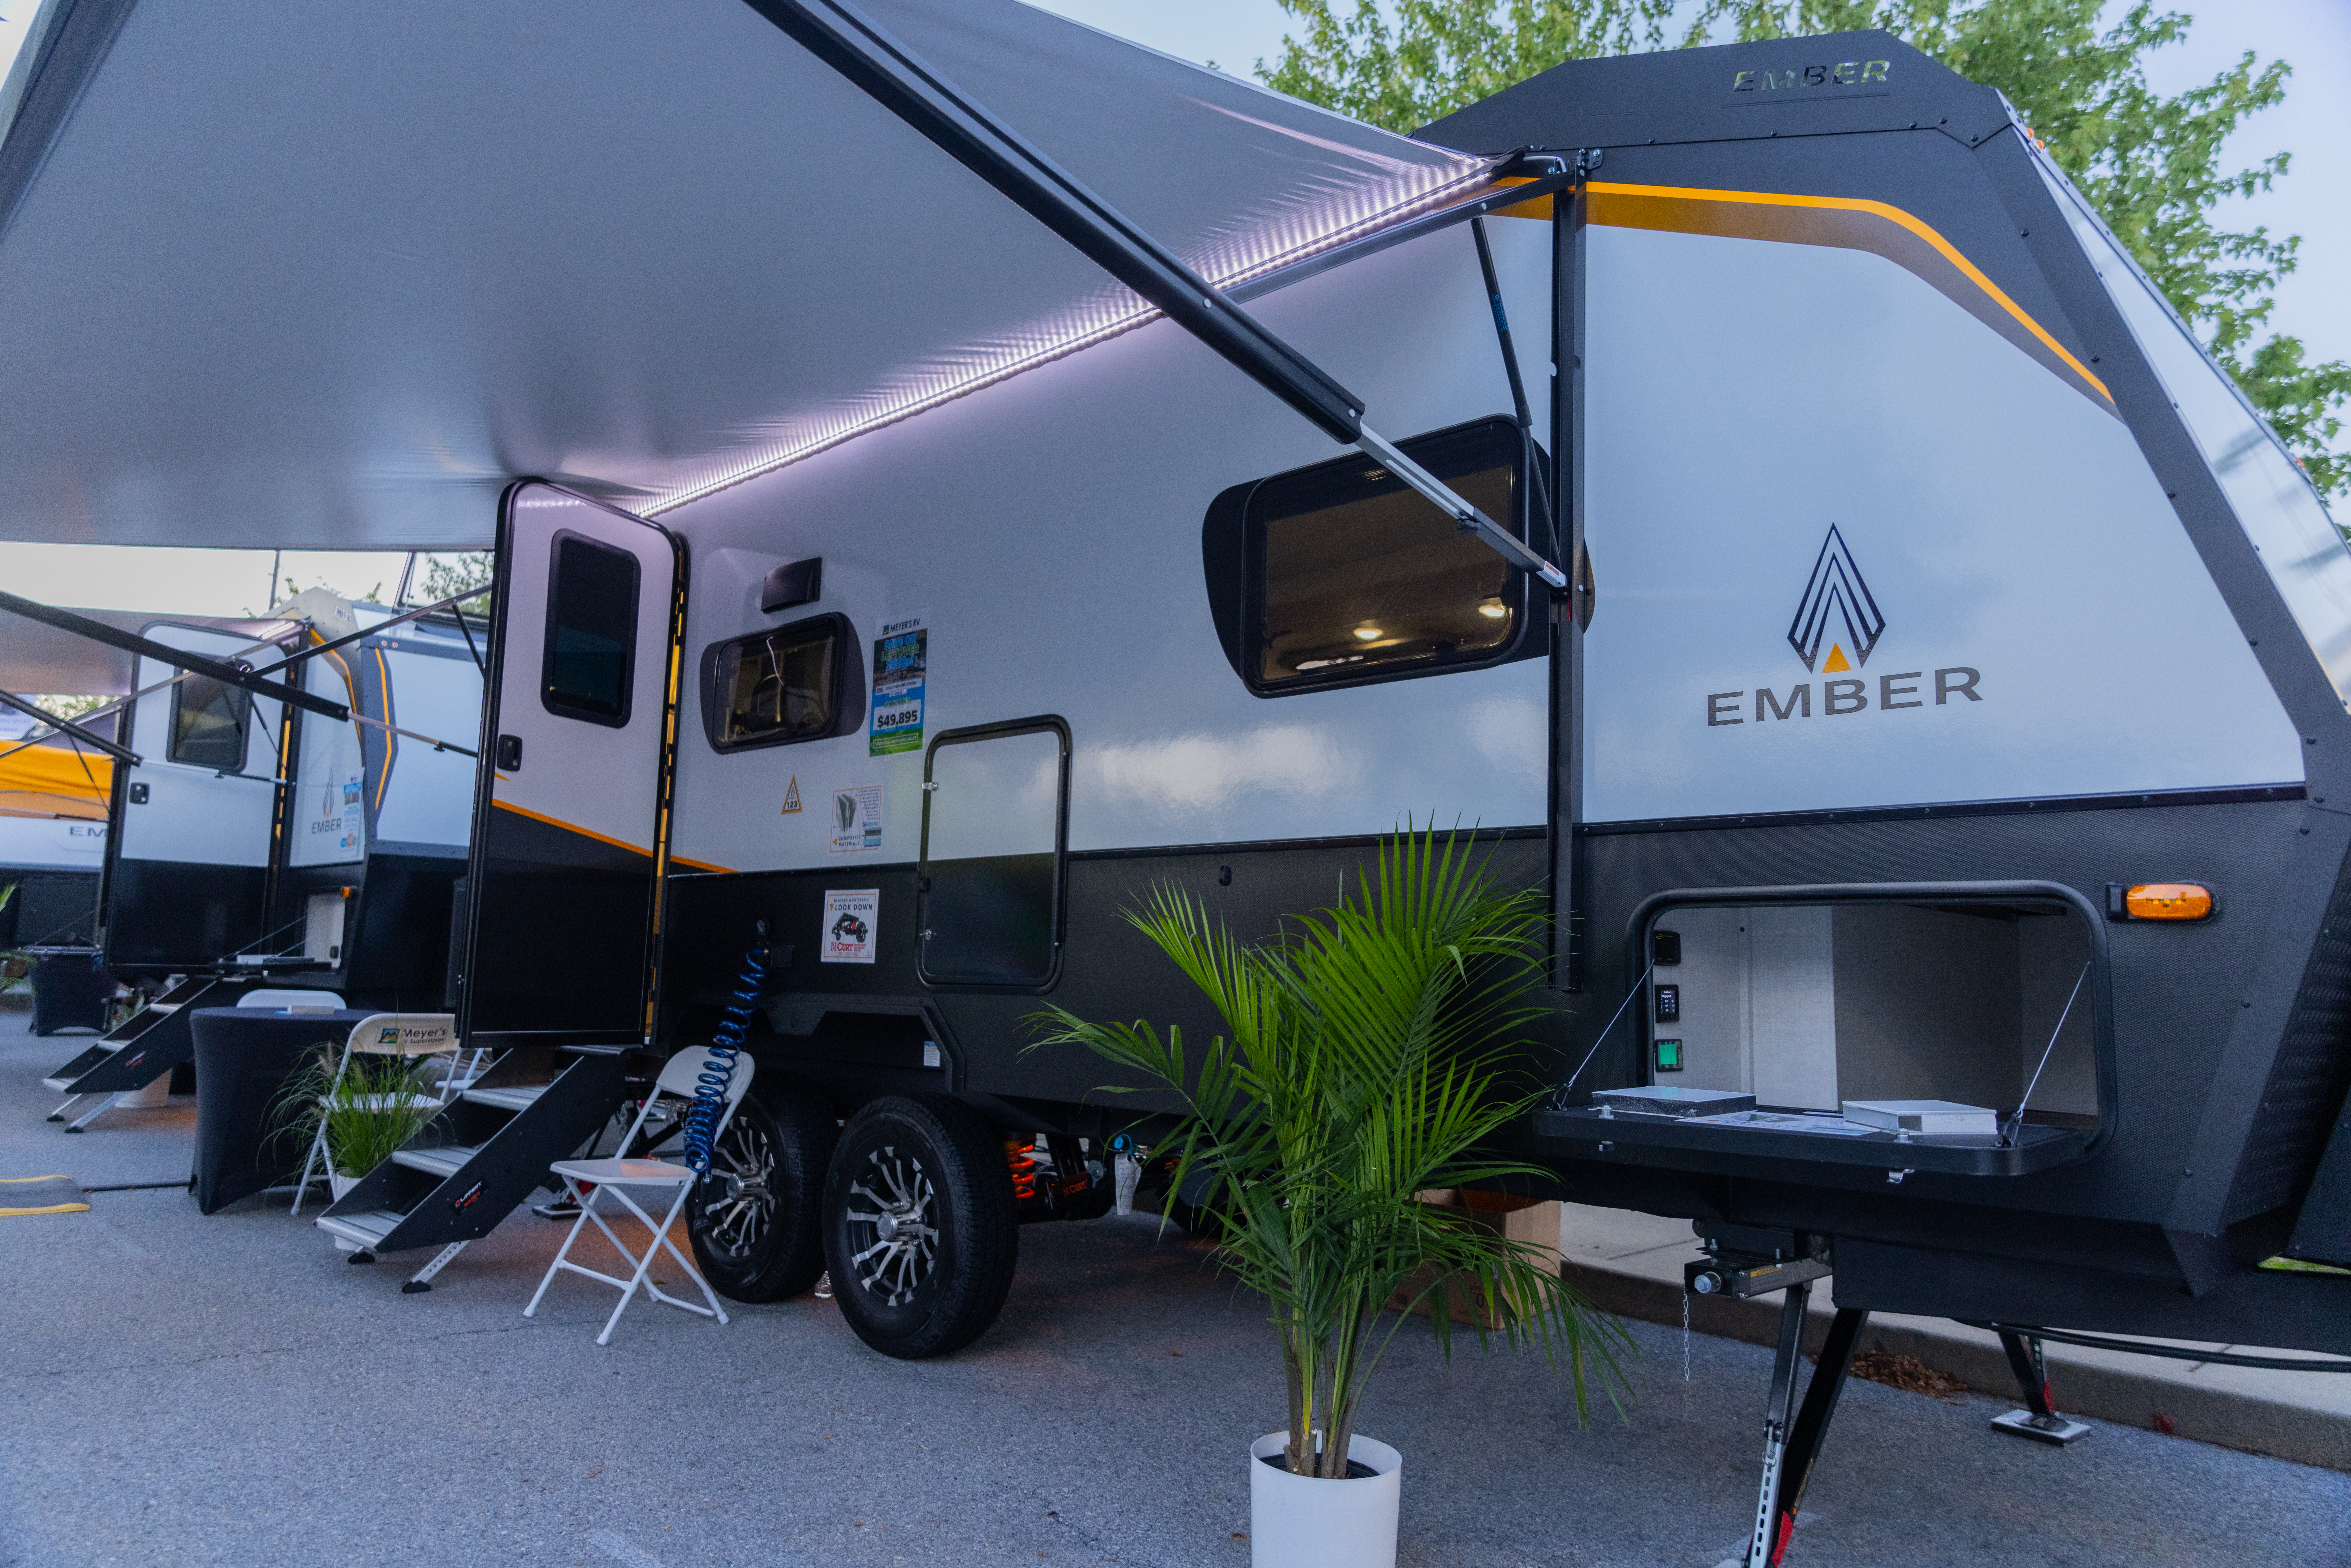 View of an Ember Travel Trailer at Hershey RV show 2022